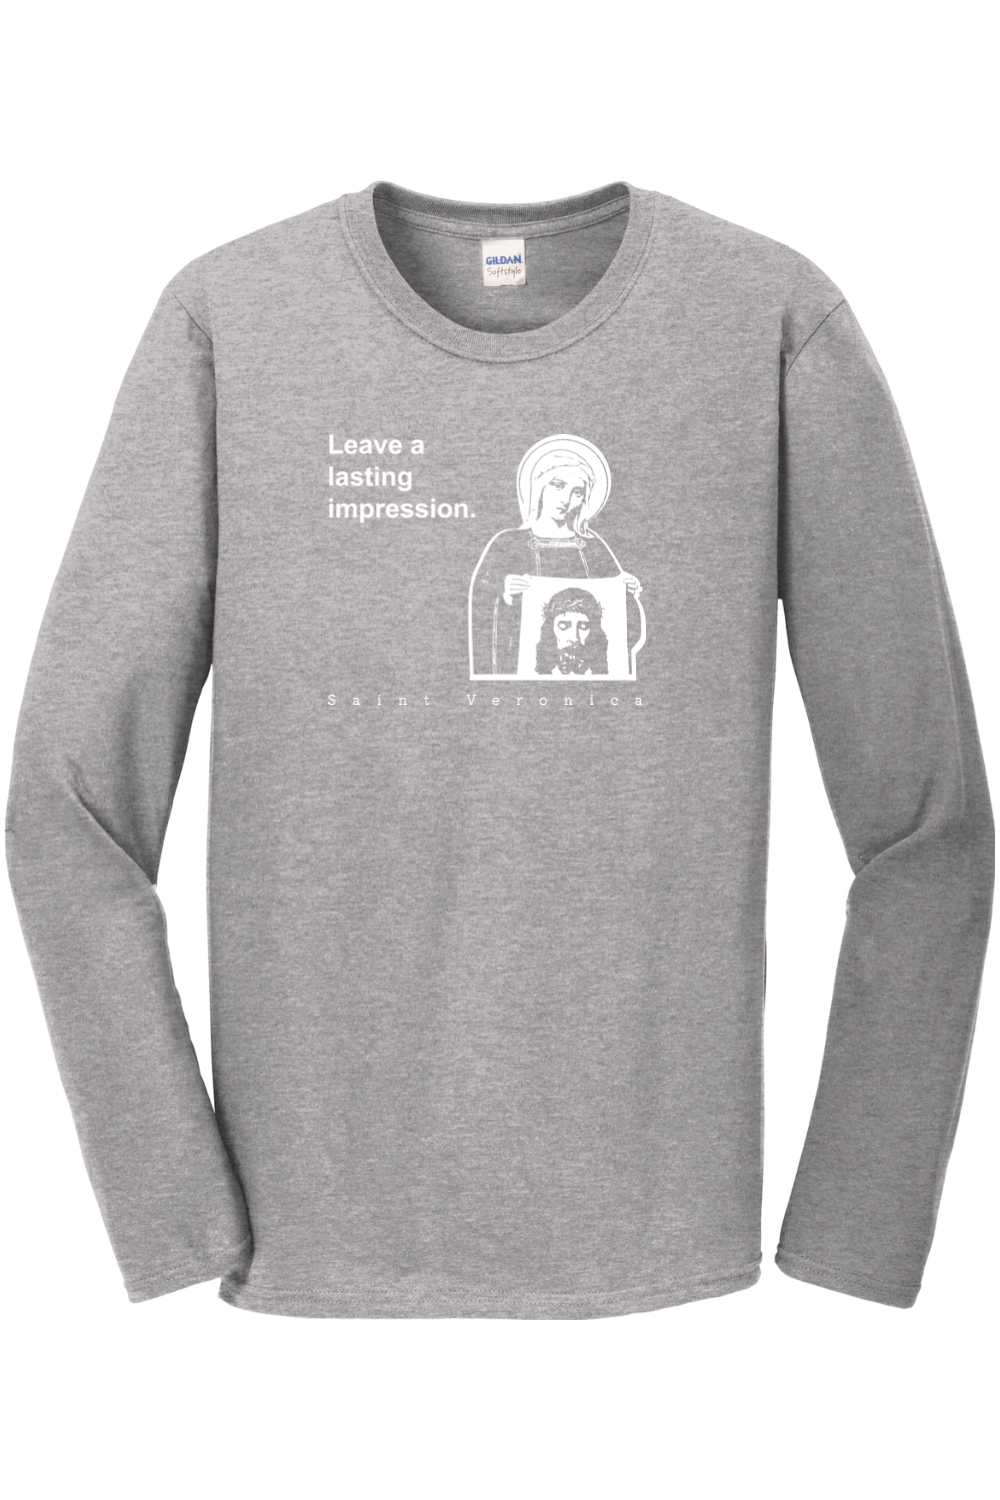 Leave a Lasting Impression - St Veronica Long Sleeve